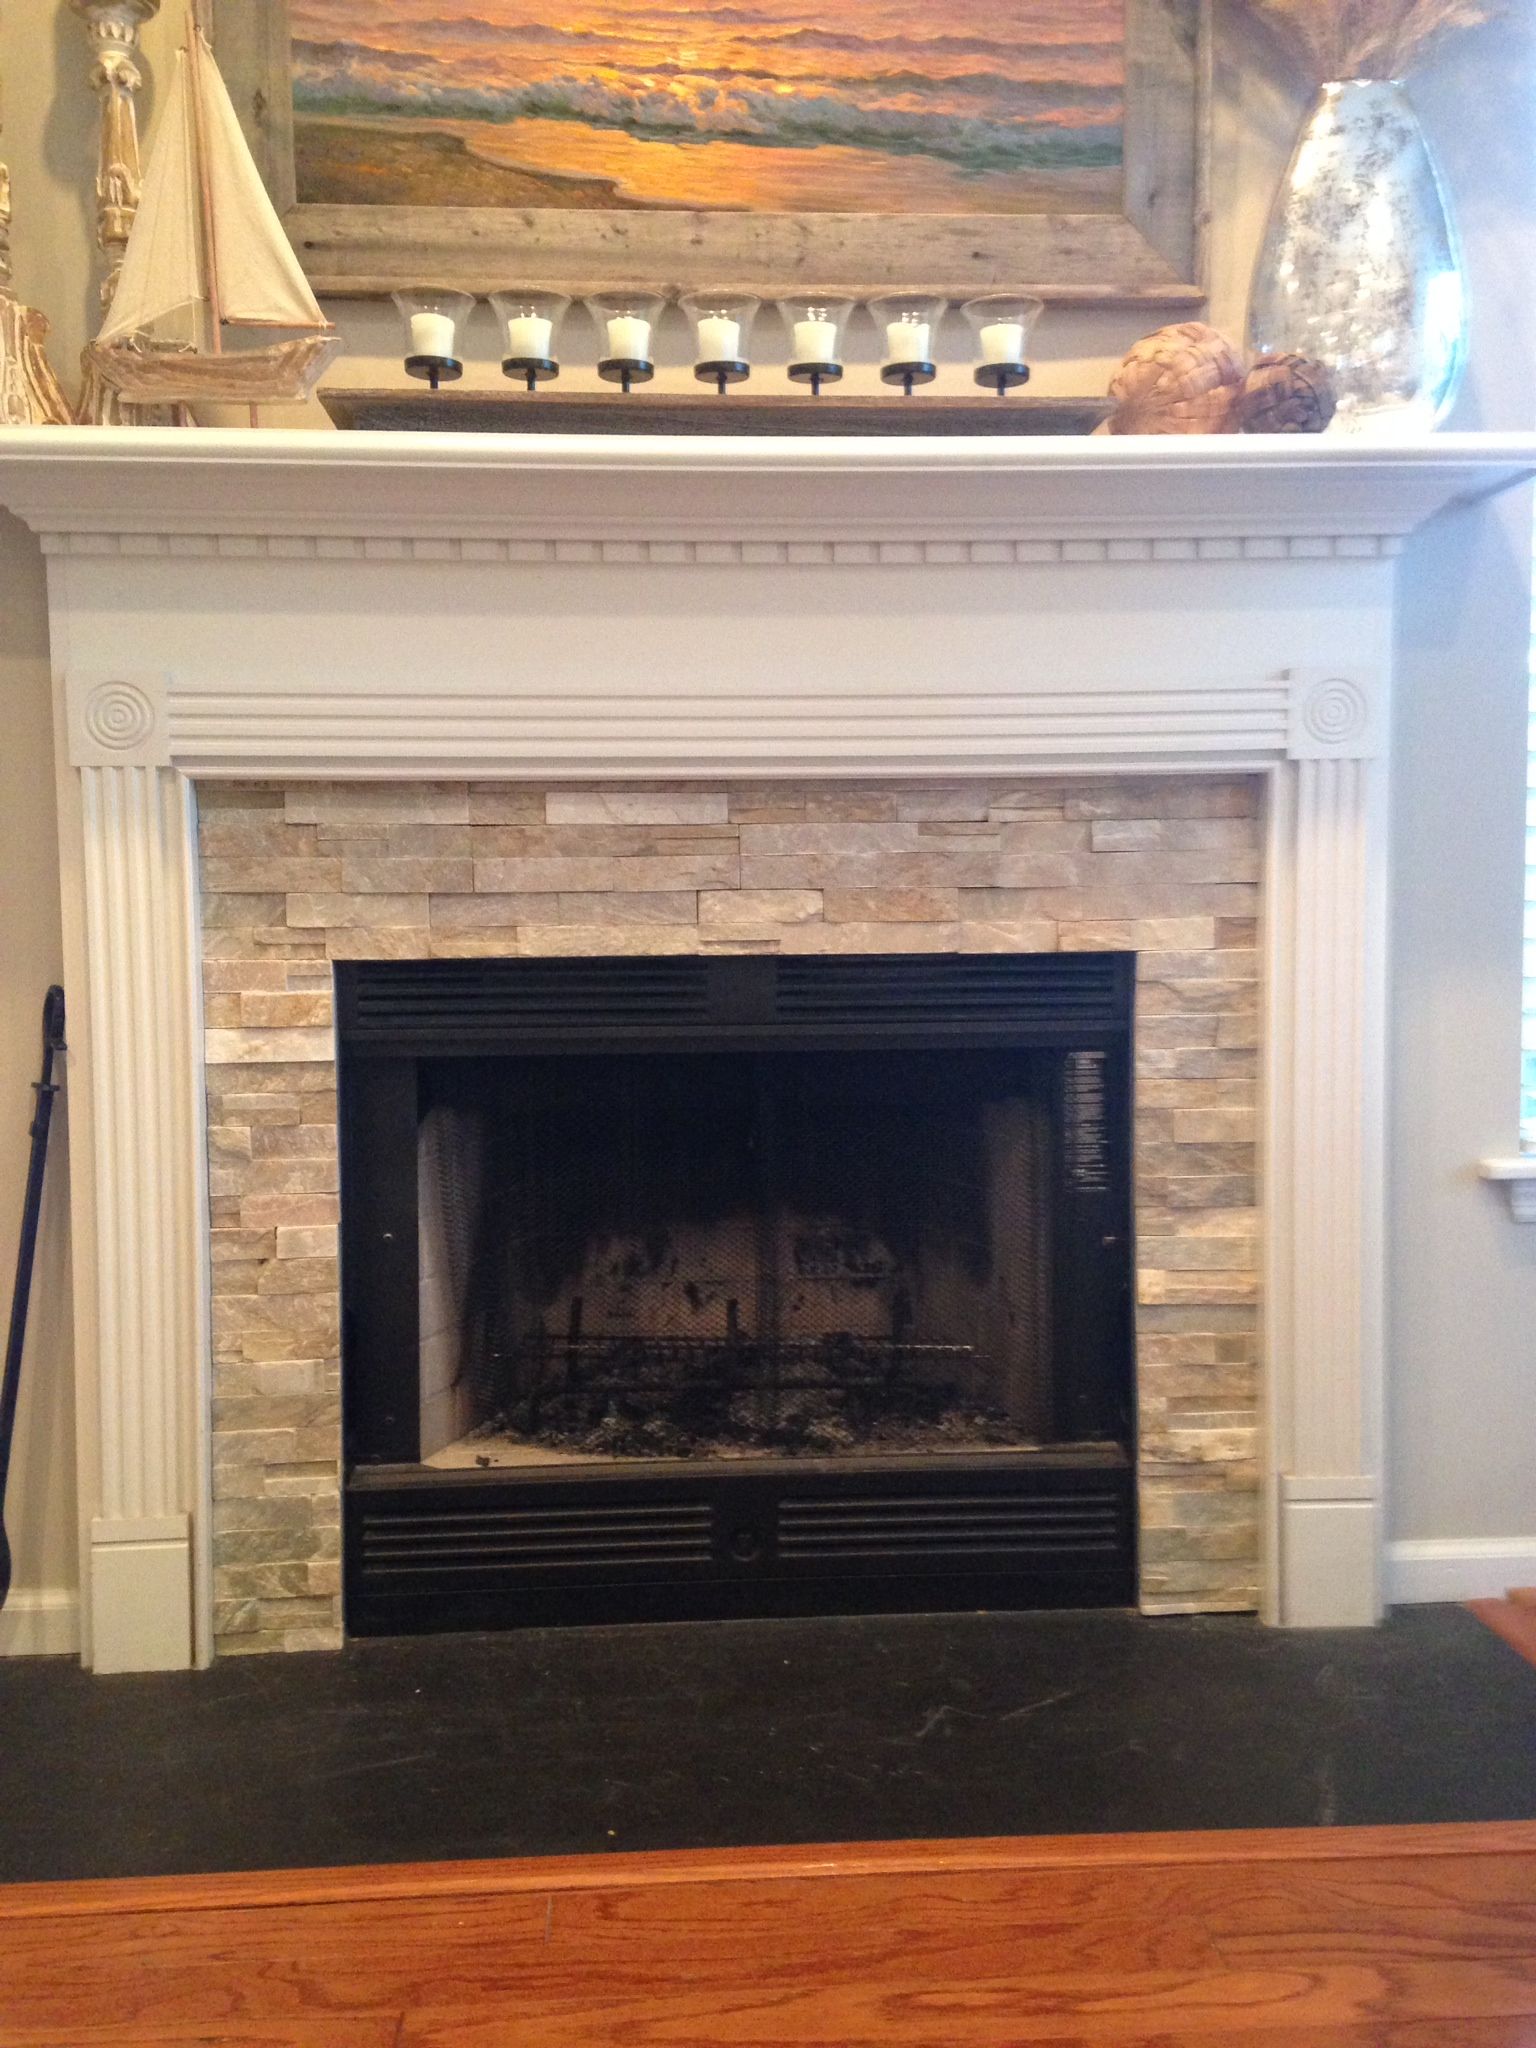 Electric Stone Fireplace with Mantle Lovely Fireplace Idea Mantel Wainscoting Design Craftsman